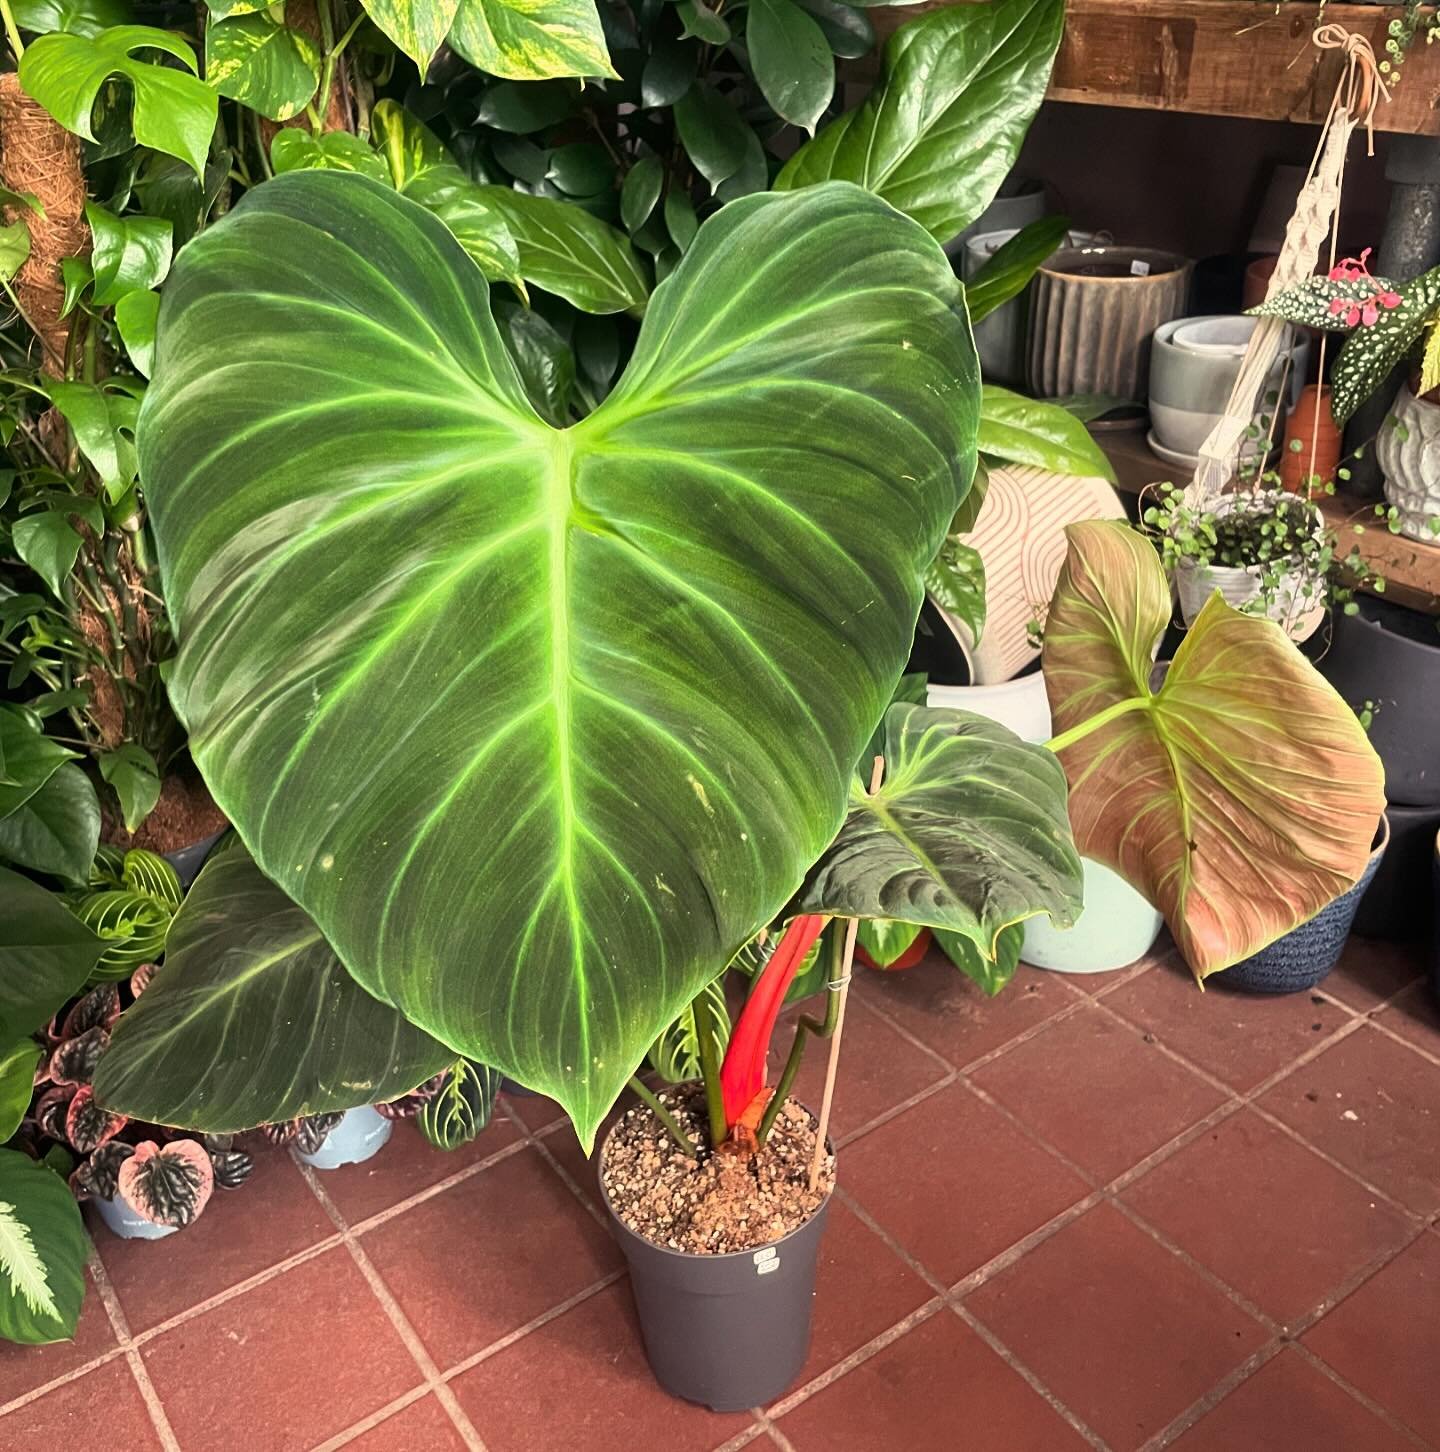 Some favourites from our latest delivery🪴
.
.
.
.
.
#houseplants #plants #indoorplants #rareplants #philodendron #plantshop #aroids #thearoidattic #plantsplantsplants #houseplantclub #cheltenham #visitcheltenham #cheltenhamlife #smallbusinessuk